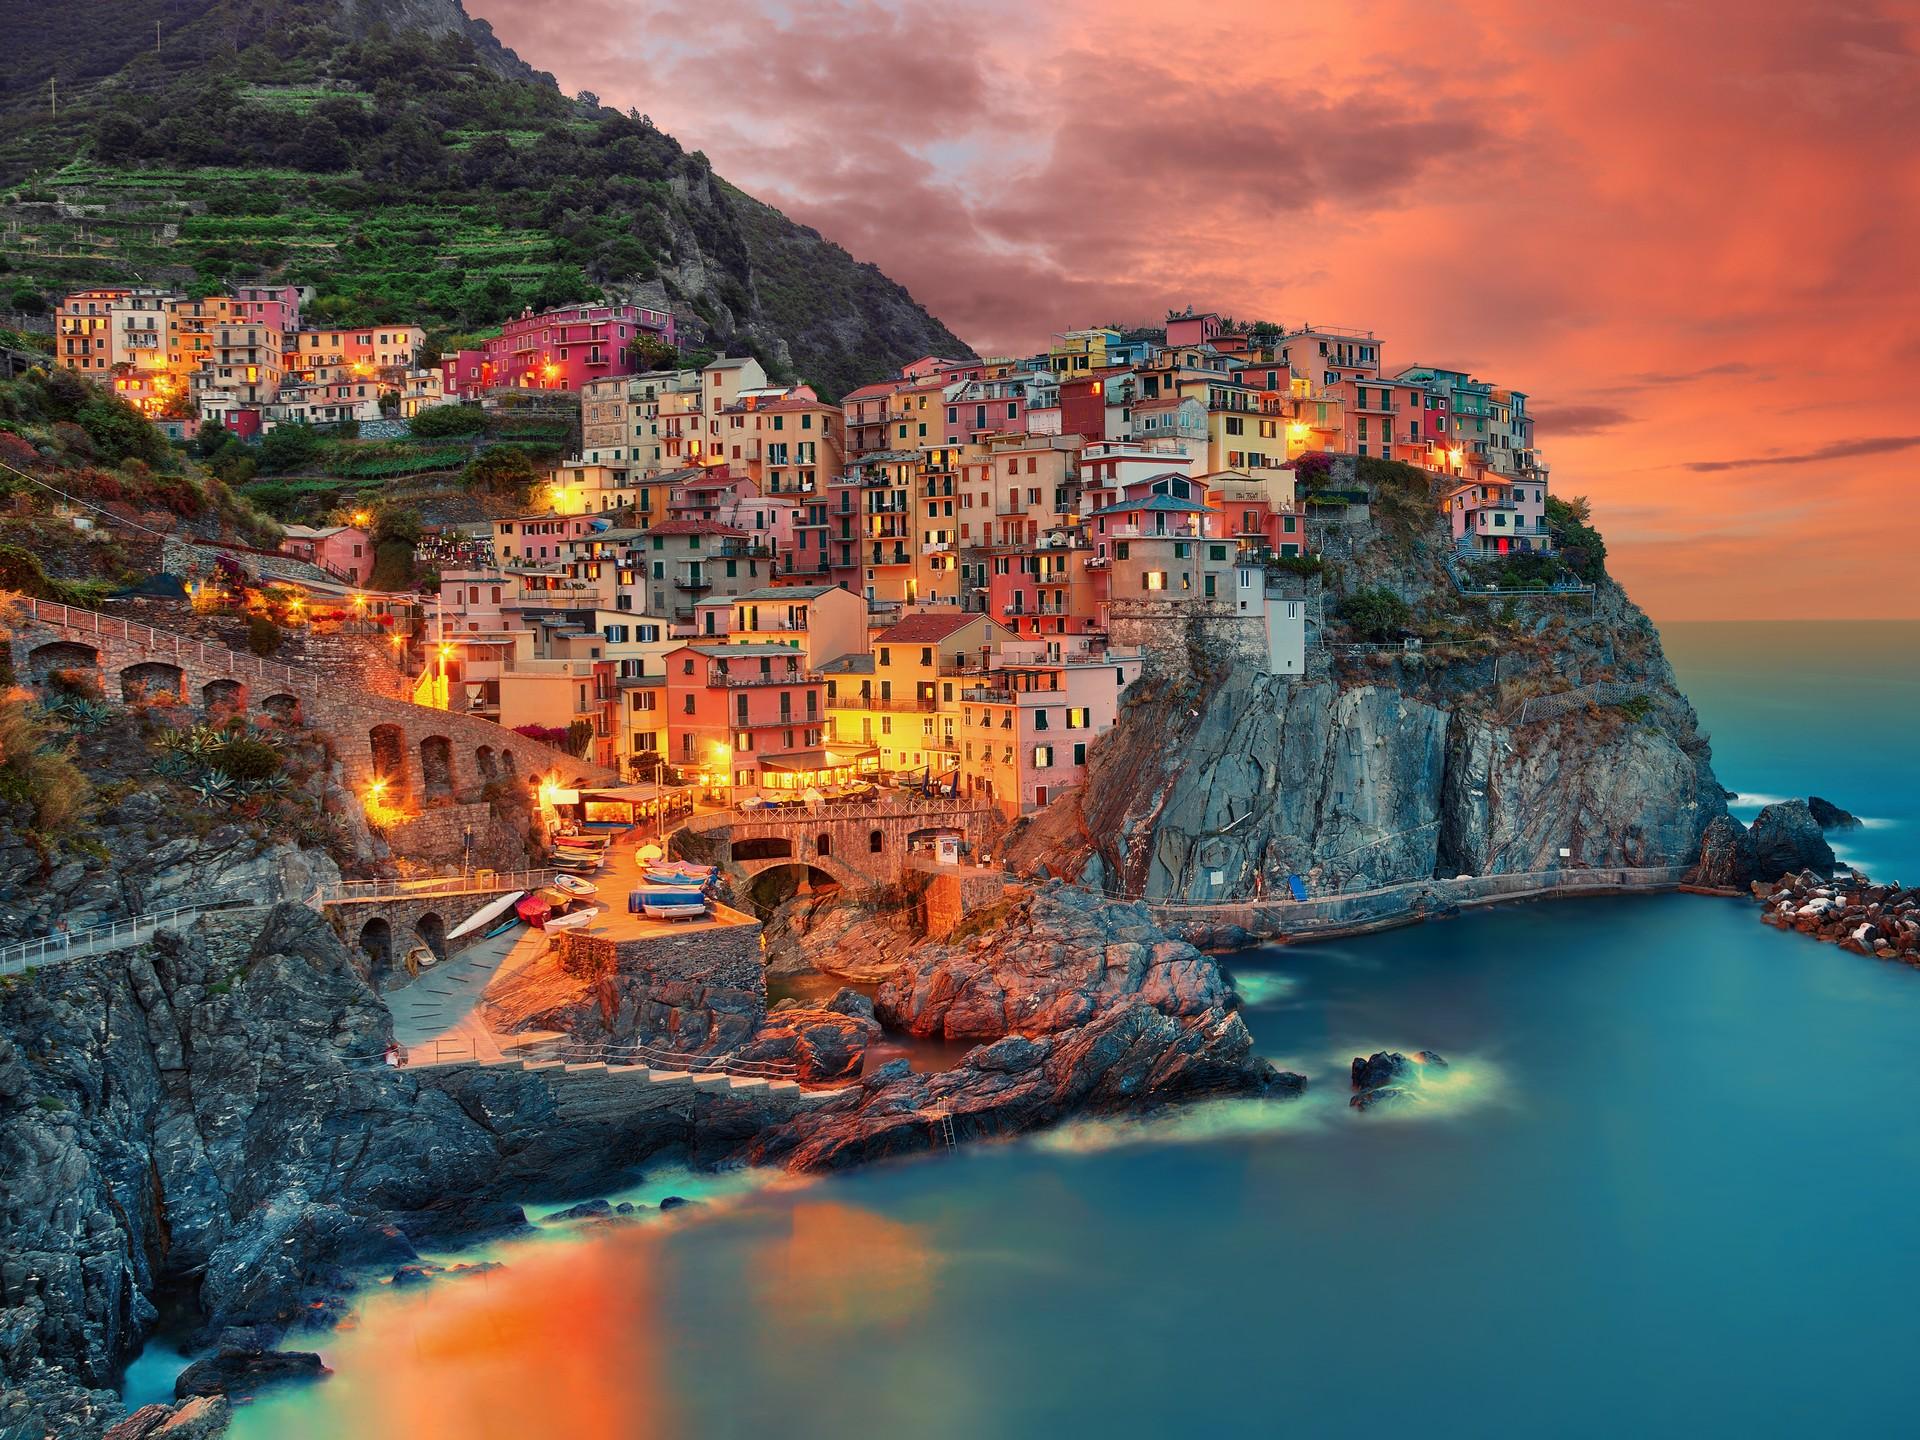 Mountain range in Cinque Terre at sunset time